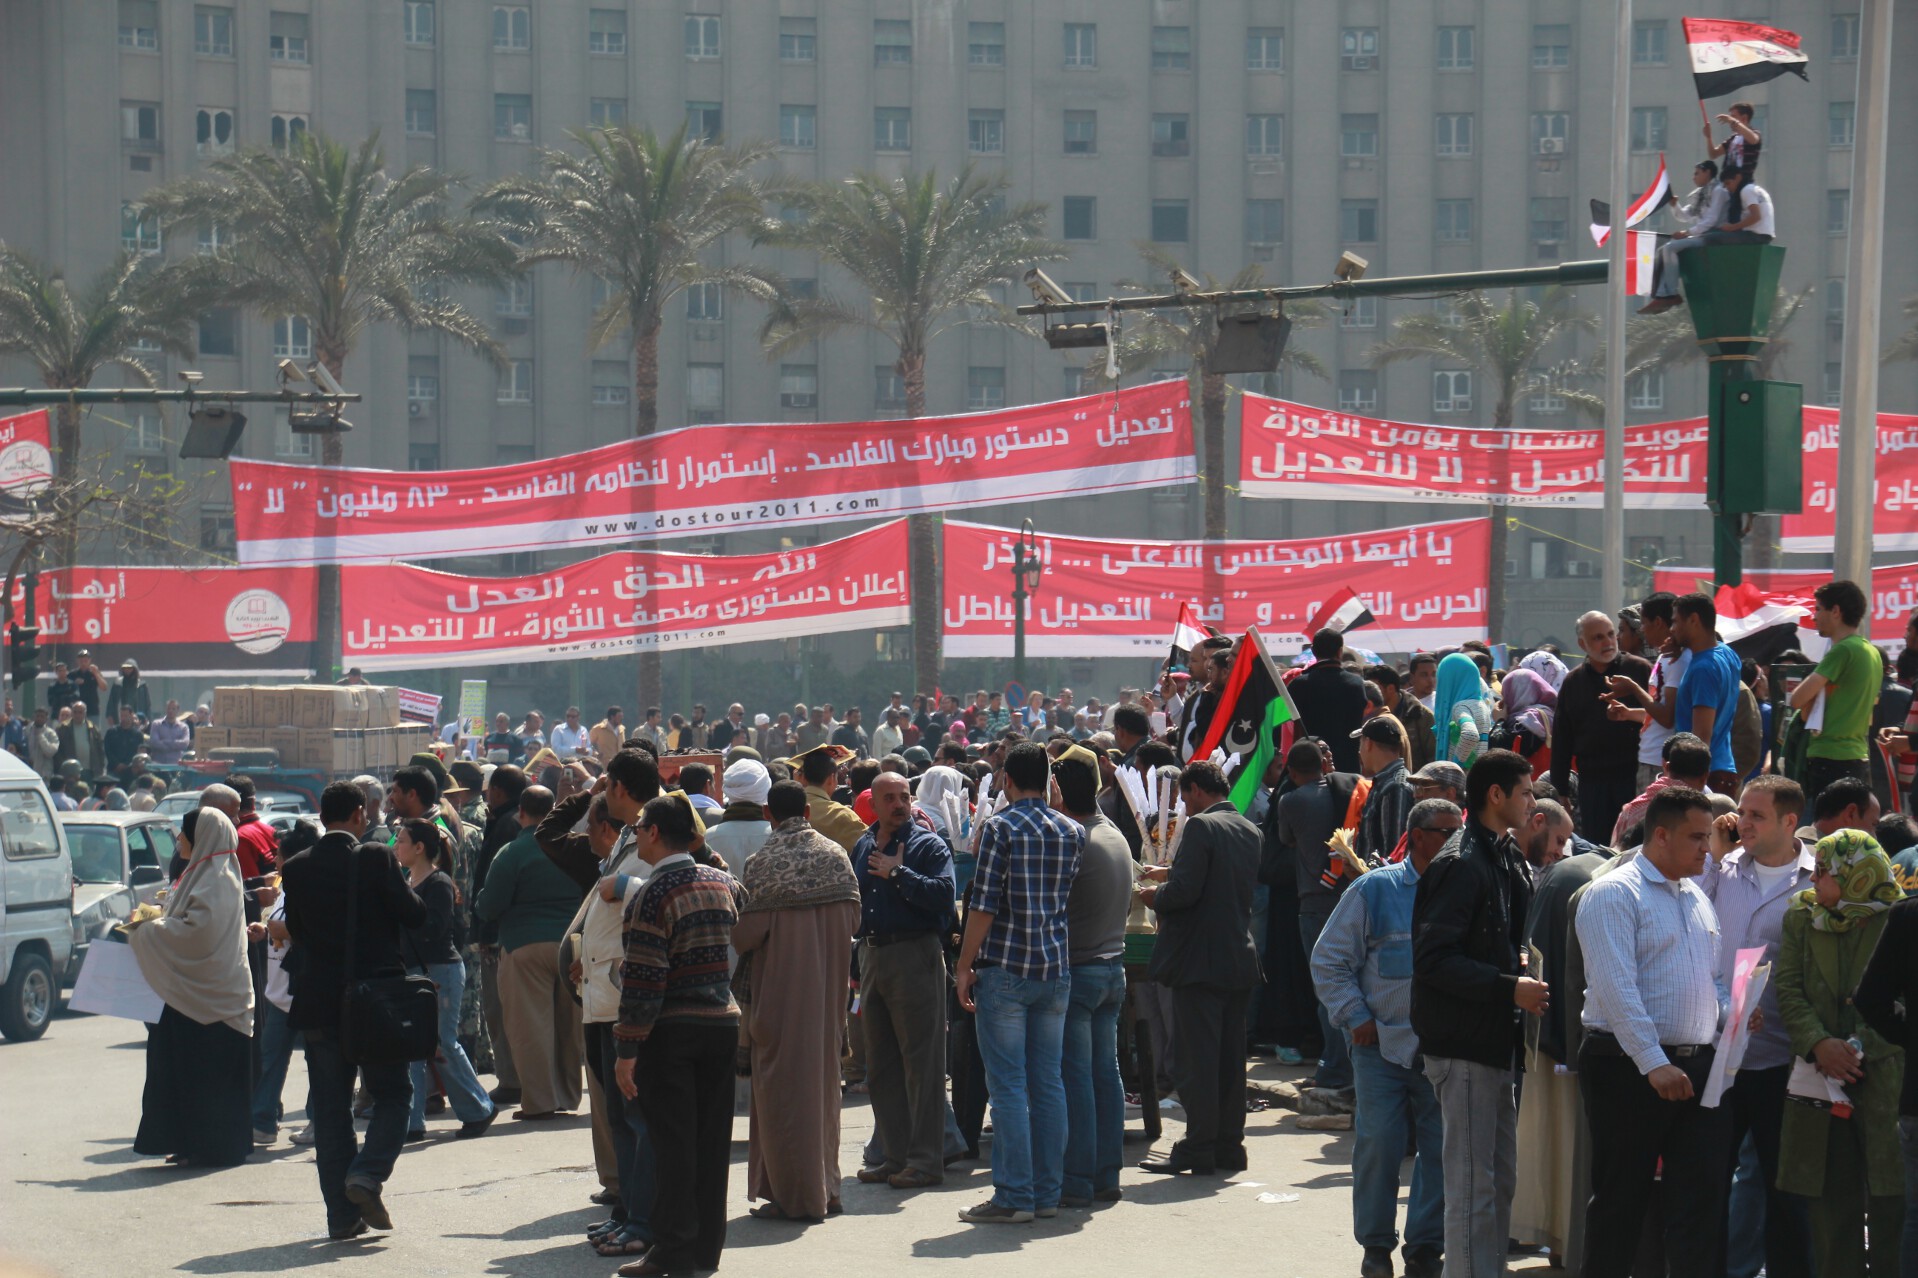 Protesters hold banners in Cairo's Tahrir Square on the day before a countrywide vote on constitutional amendments.